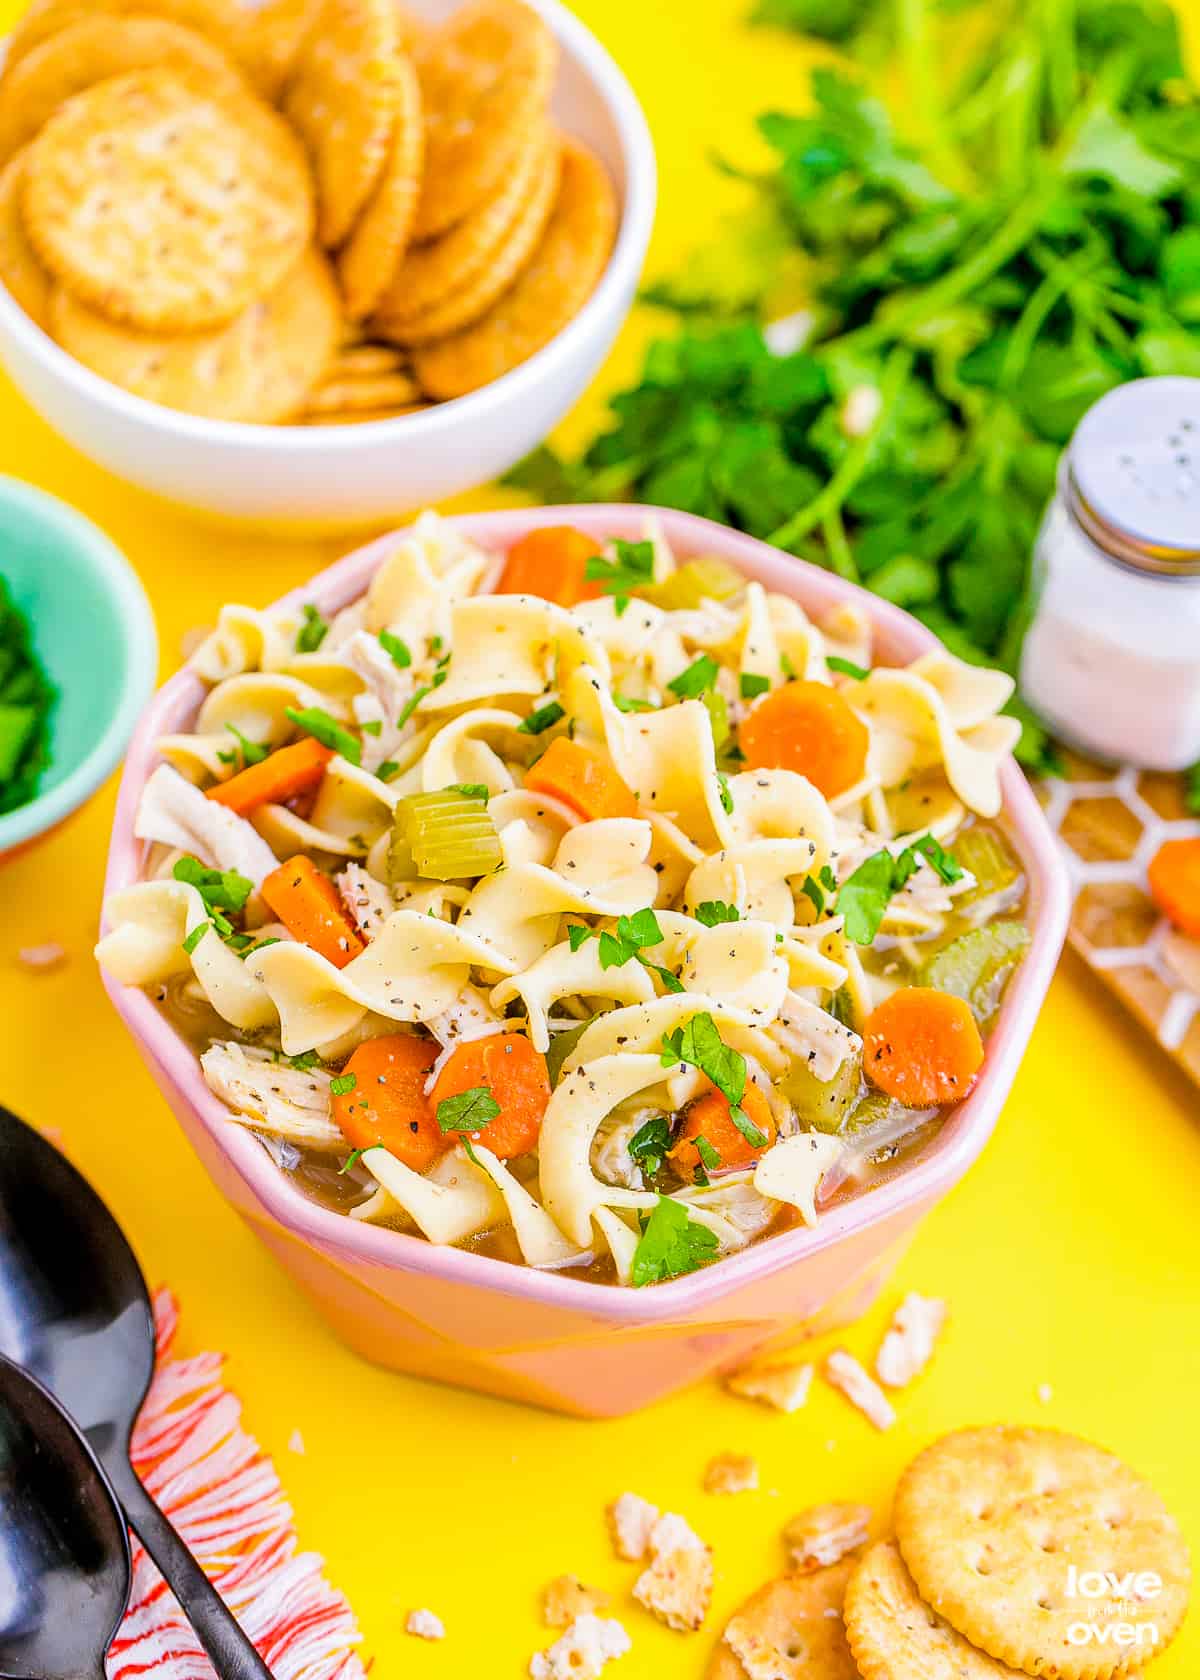 https://www.lovefromtheoven.com/wp-content/uploads/2022/01/instant-pot-chicken-noodle-soup-47.jpg